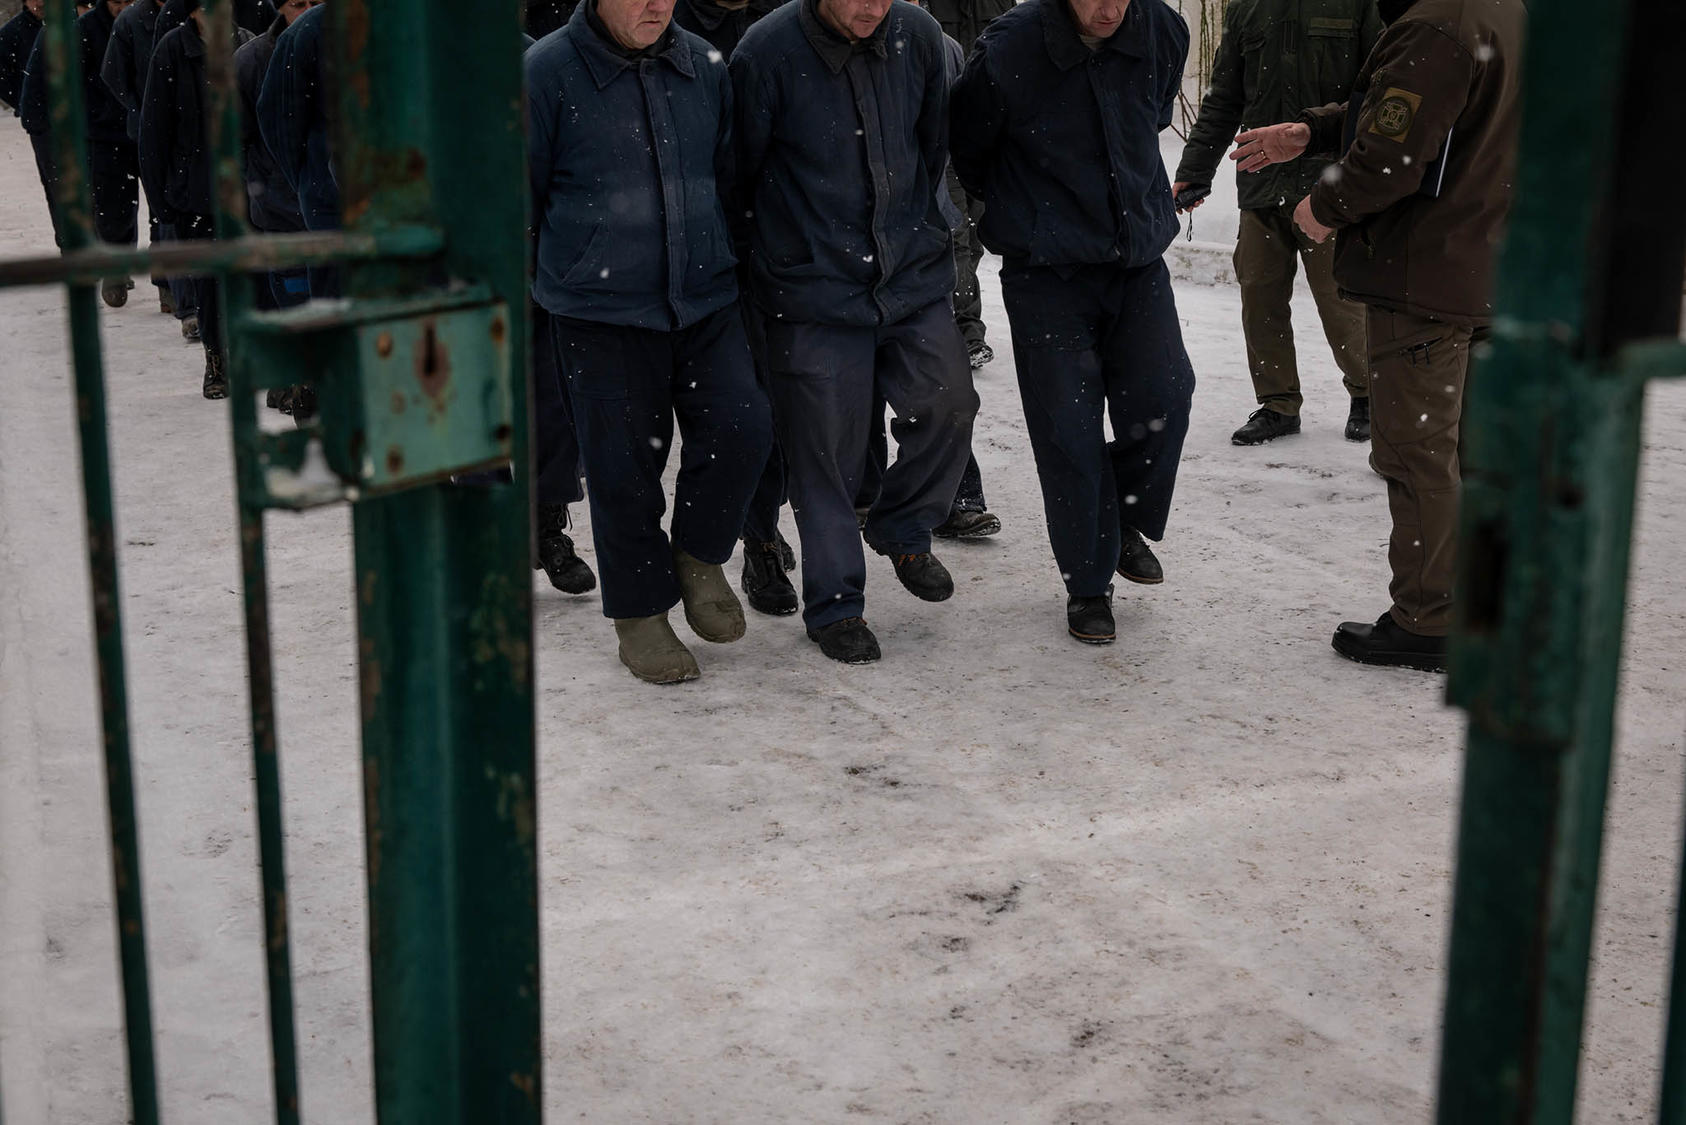 Russian prisoners of war walk in formation at a camp in western Ukraine. Ukraine has given U.N. monitors access to POWs it holds, as required by the Geneva Conventions. Russia has refused all access. (Nicole Tung/The New York Times)